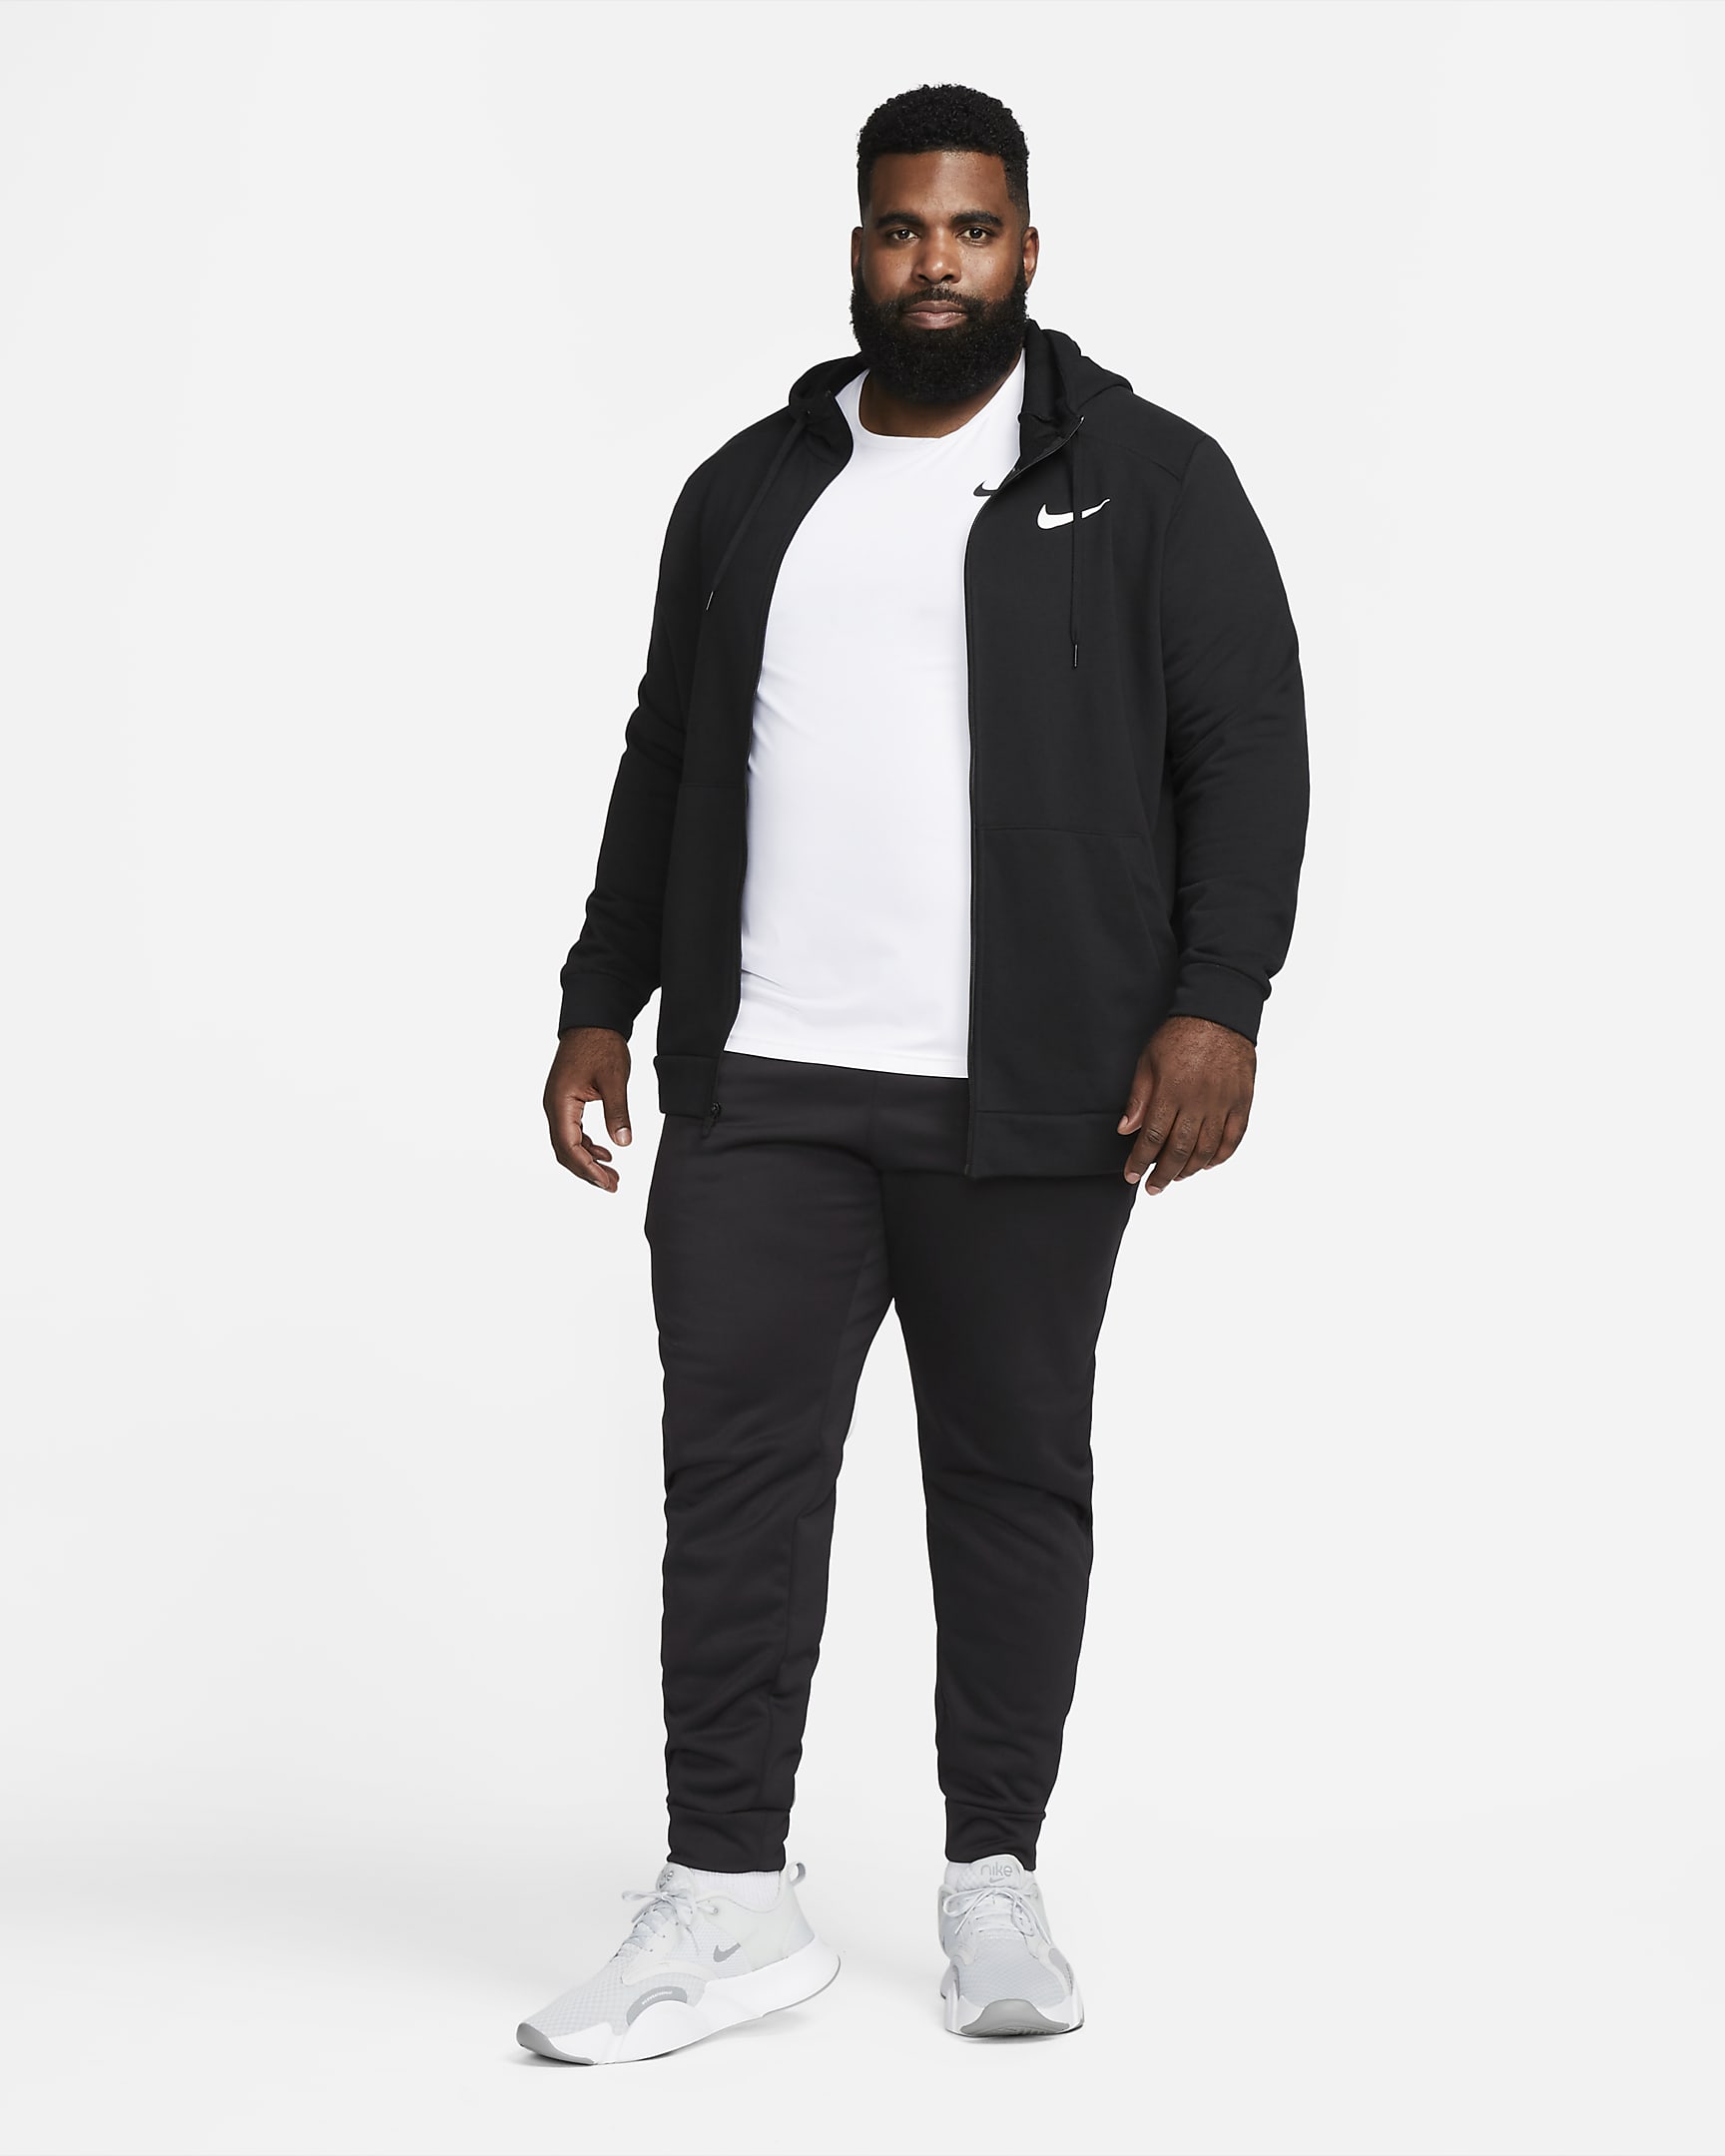 Nike Therma Men's Therma-FIT Tapered Fitness Trousers. Nike BG